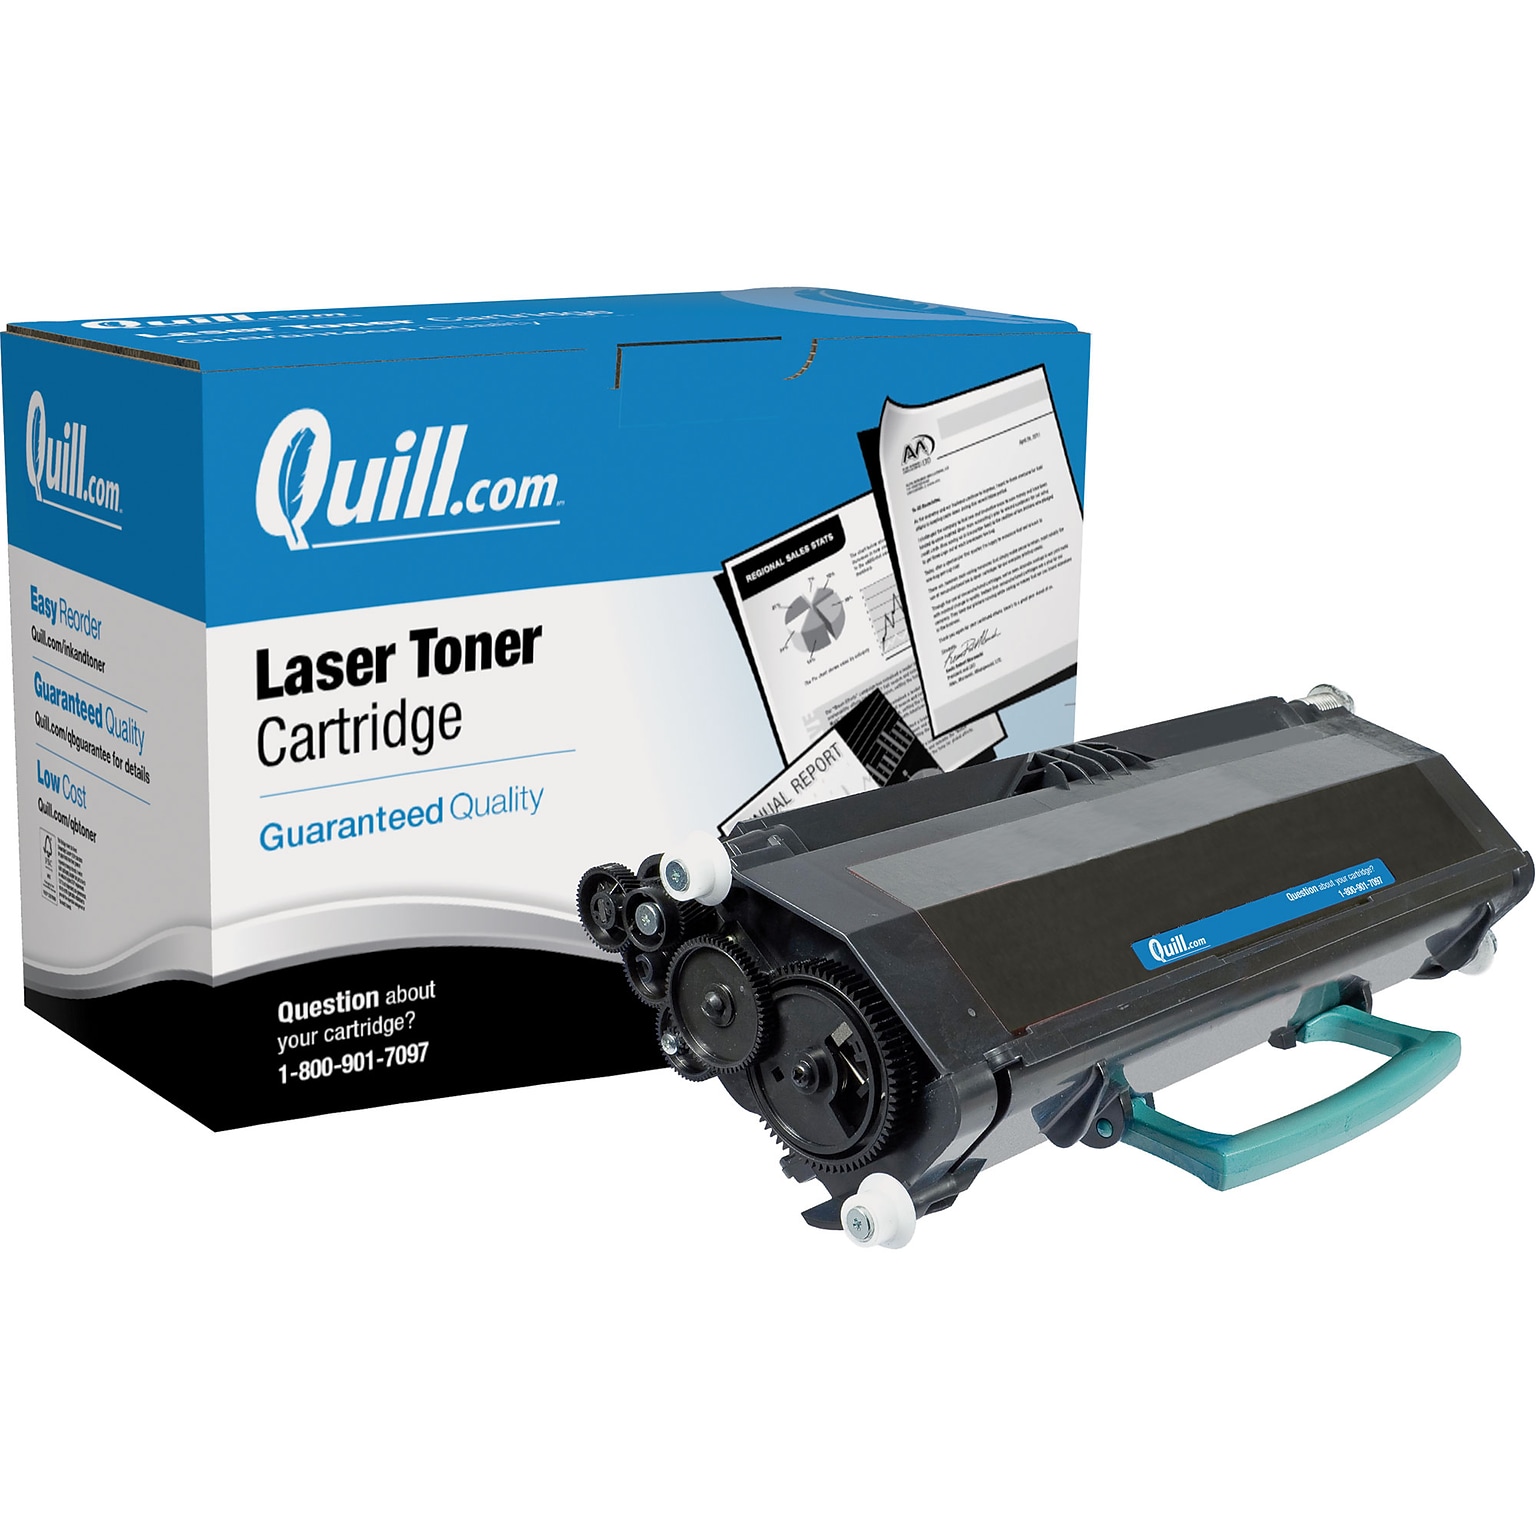 Quill Brand Remanufactured Laser Toner Ctdg. Comp. to Lexmark™ E460X21A Extra High Yield Black (100% Satisfaction Guaranteed)